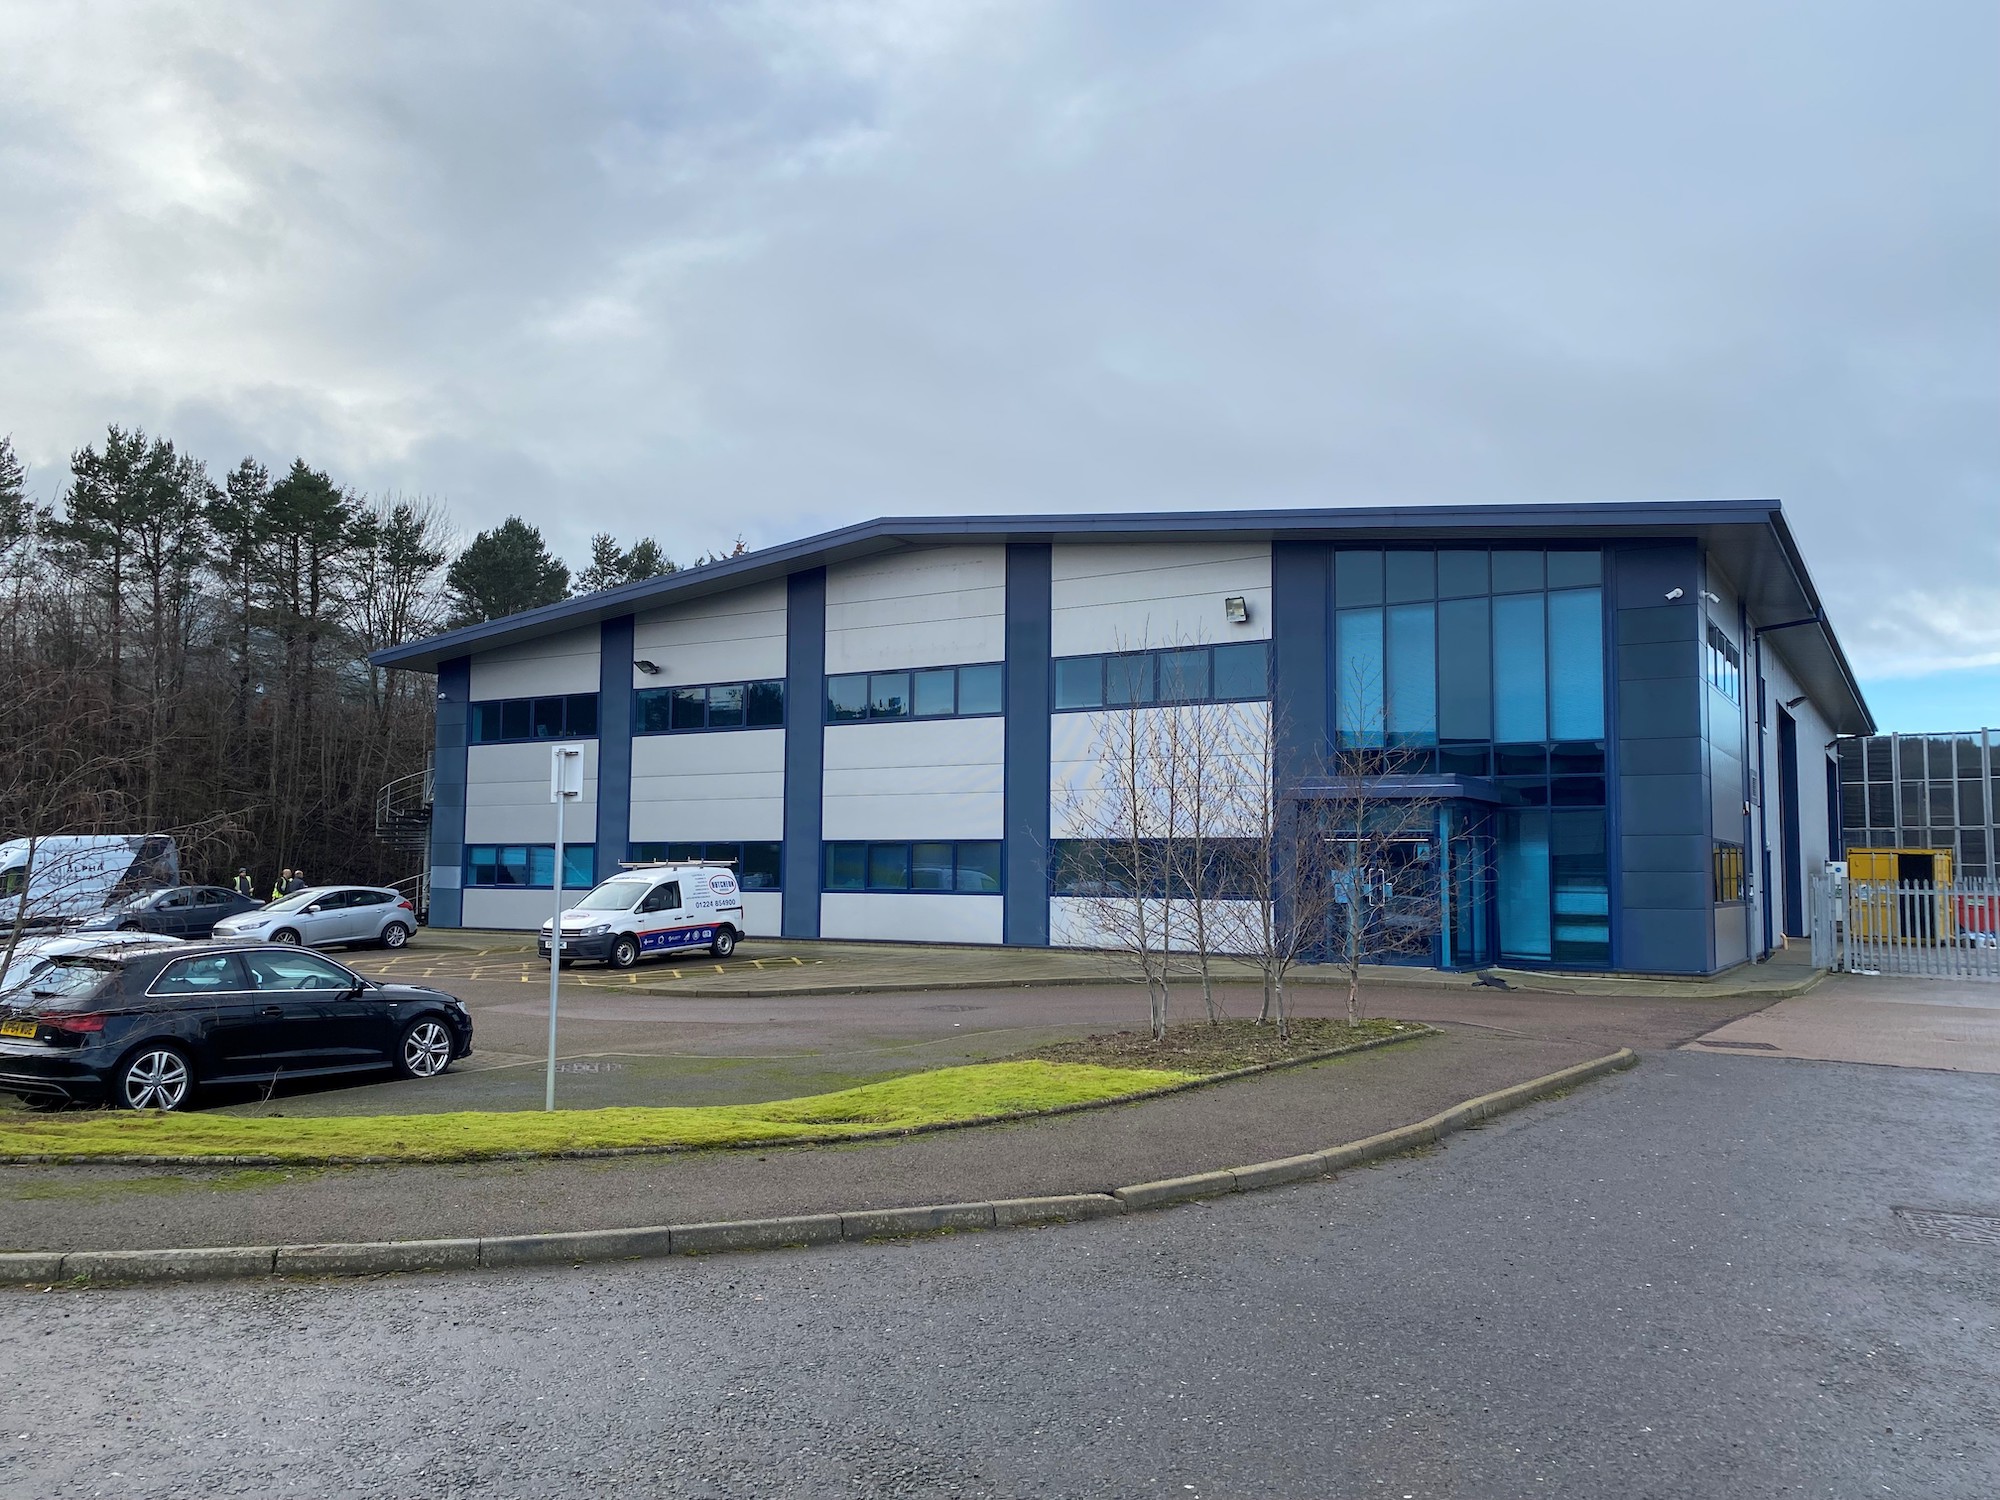 Duncan & Todd's Aberdeen HQ sold in £1.75m investment deal